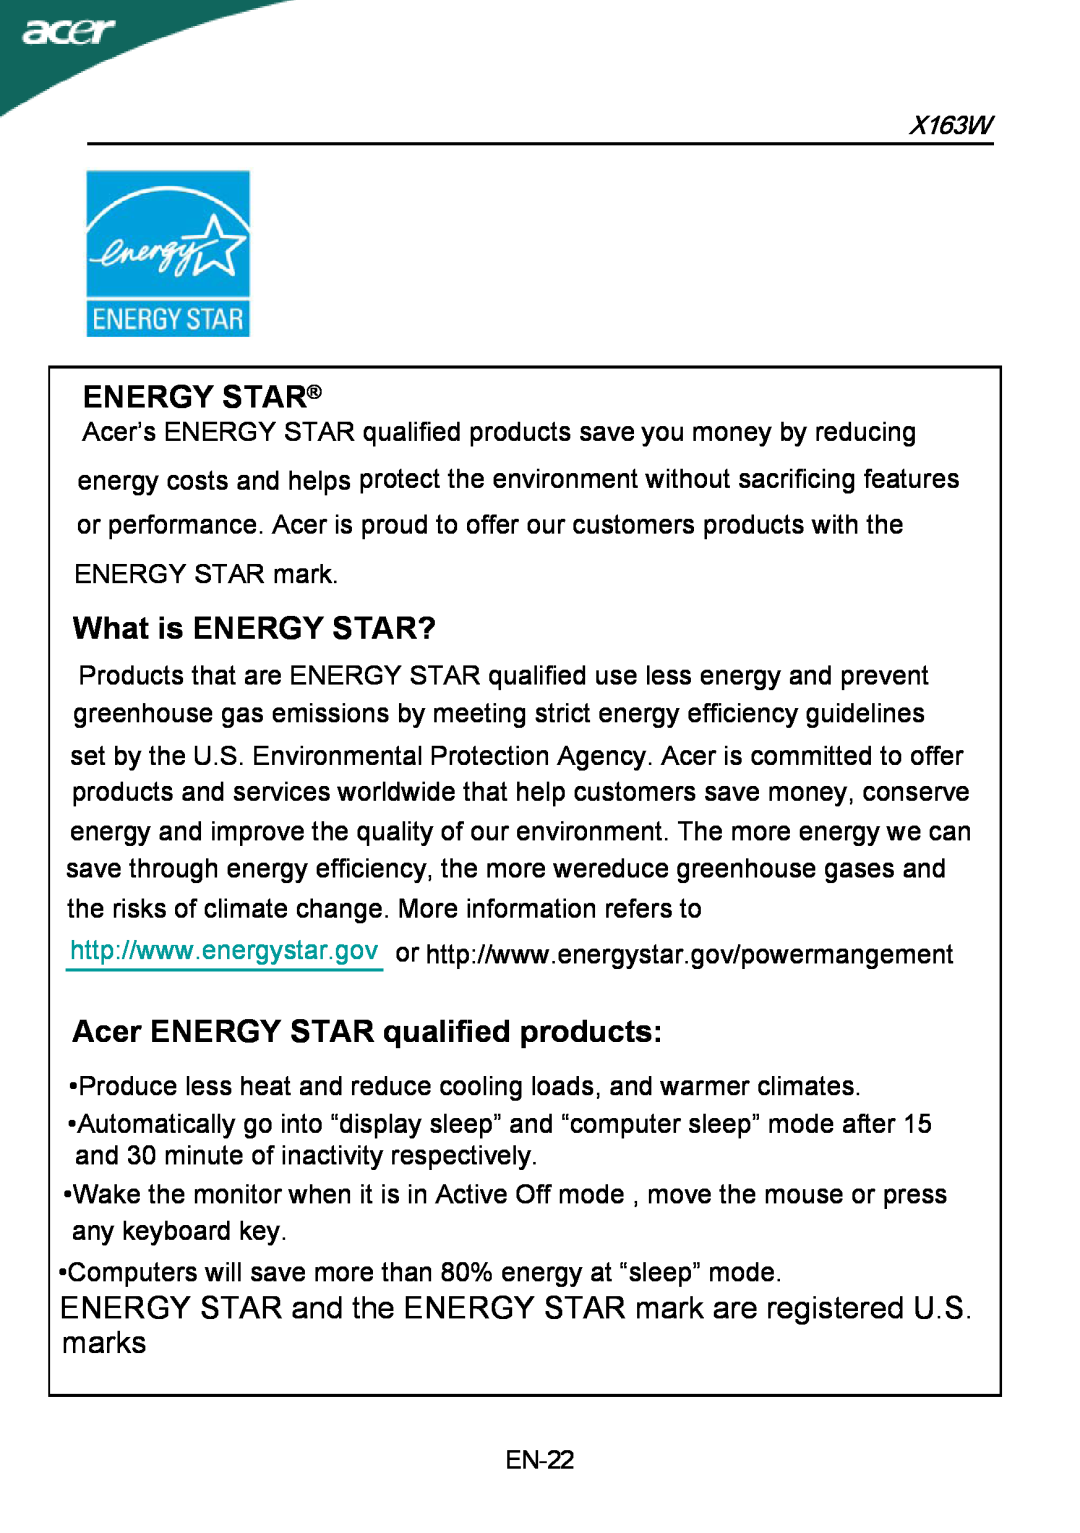 Acer X163W manual ENERGY STAR and the ENERGY STAR mark are registered U.S. marks, Energy Star, What is ENERGY STAR? 